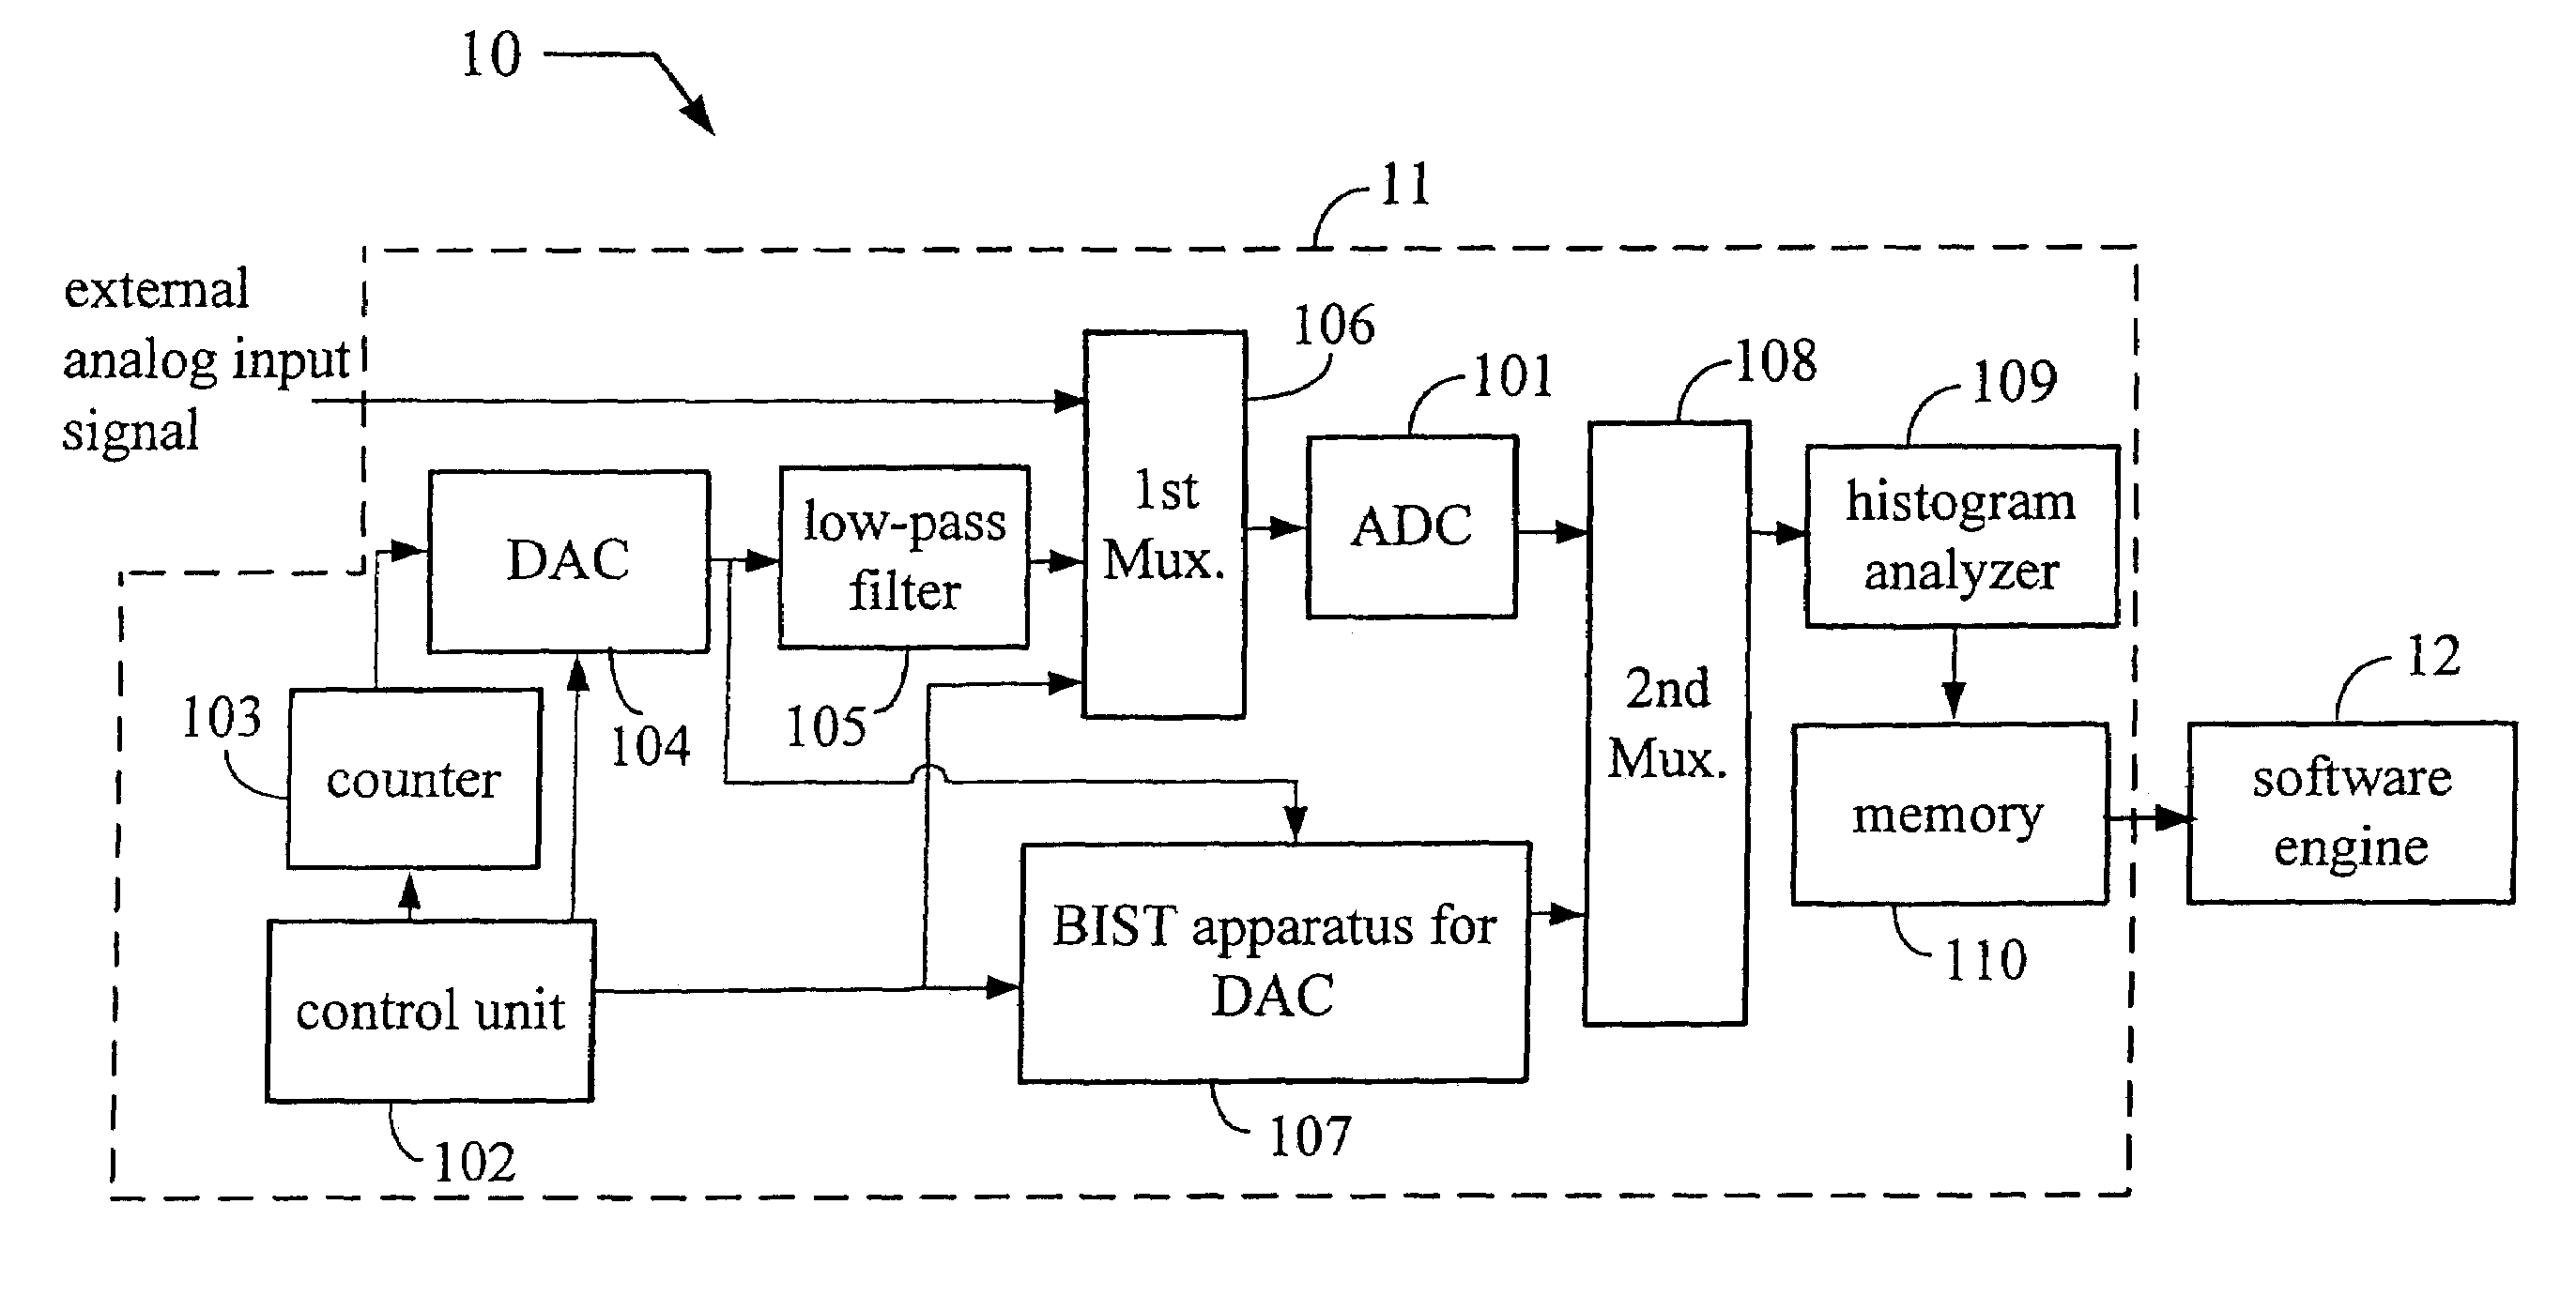 Built-in-self-test apparatus and method for analog-to-digital converter